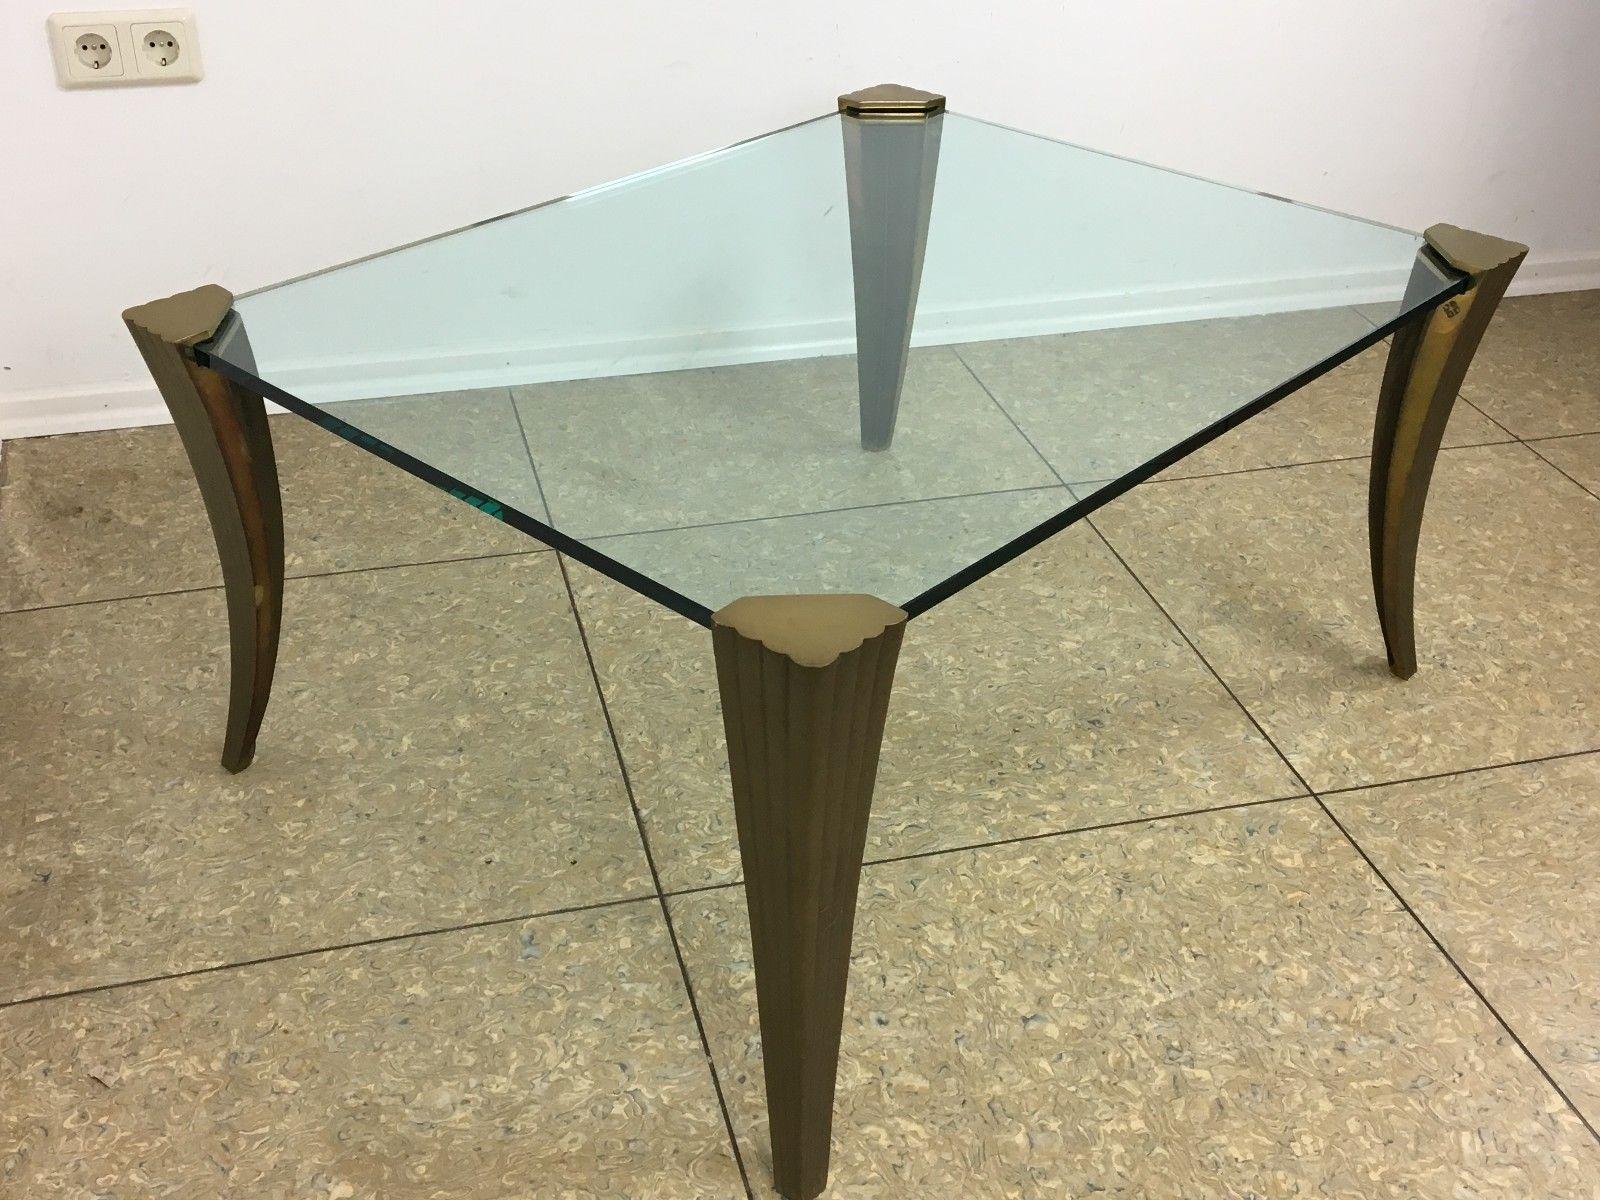 70s style coffee table